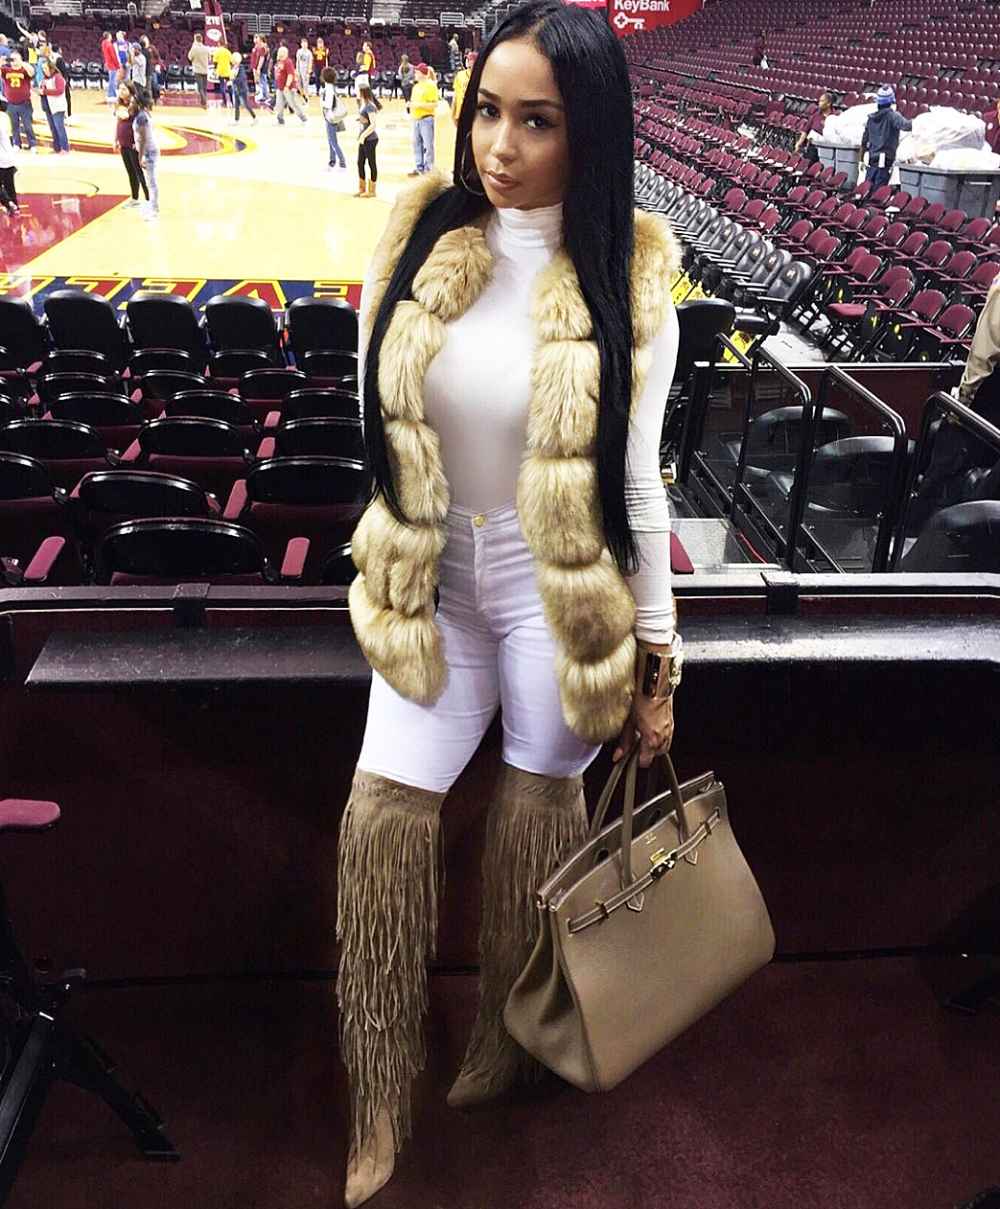 5 Things to Know About Tristan Thompson’s Ex Jordan Craig